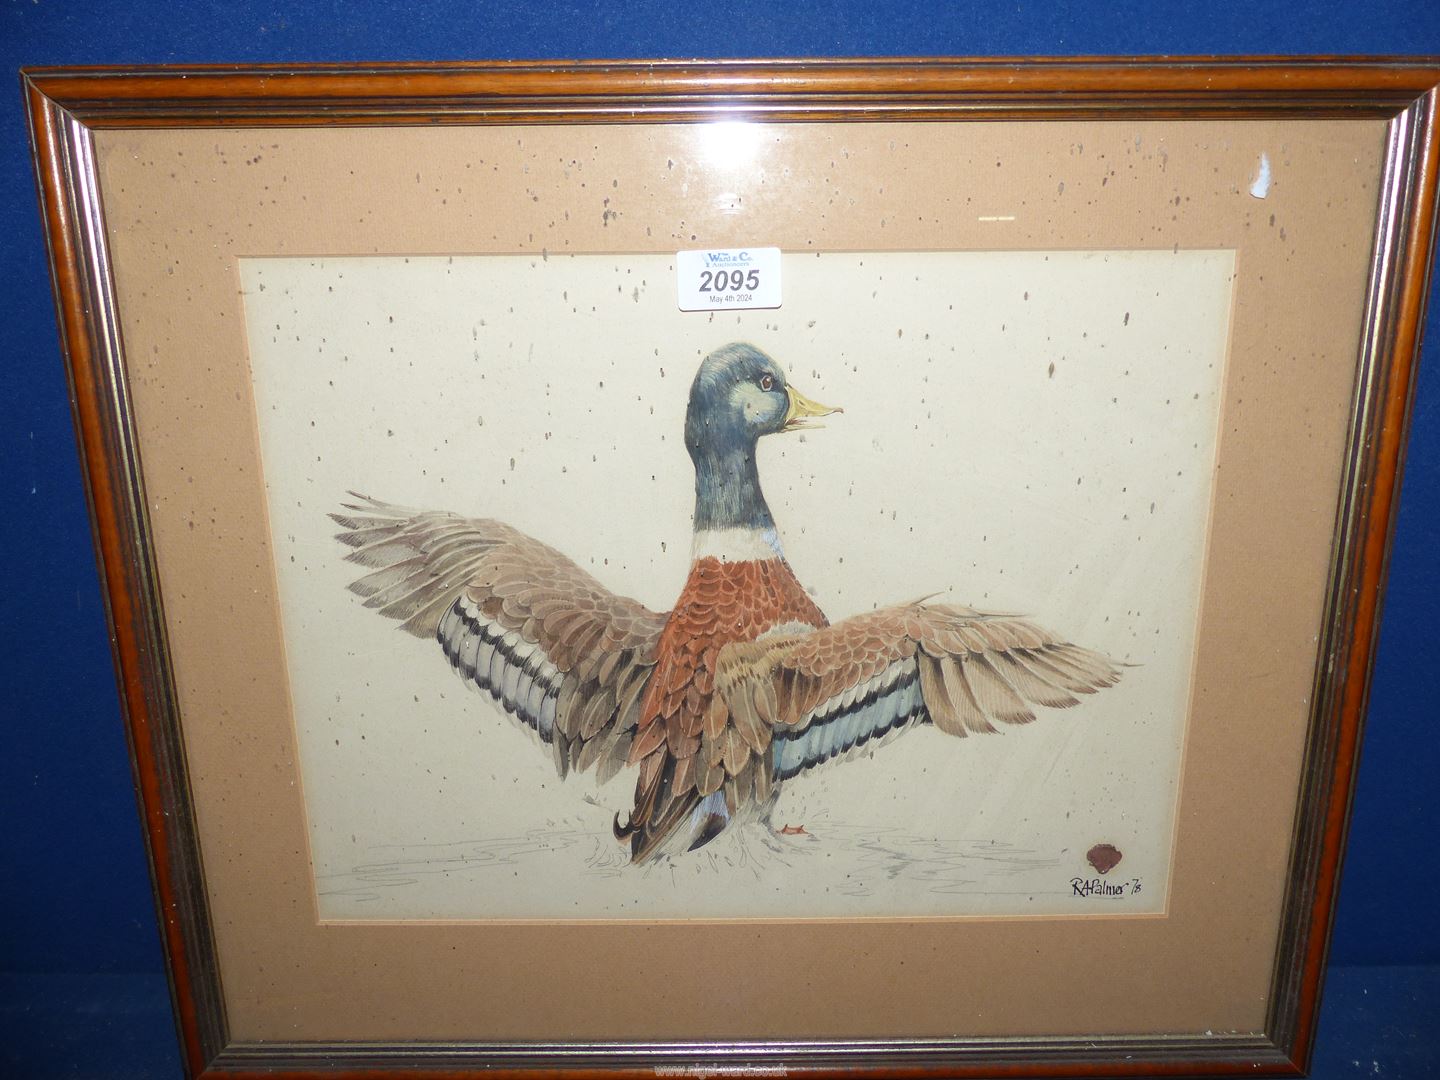 A framed and mounted Watercolour of a Duck with outstretched wings. Signed lower right R.A.